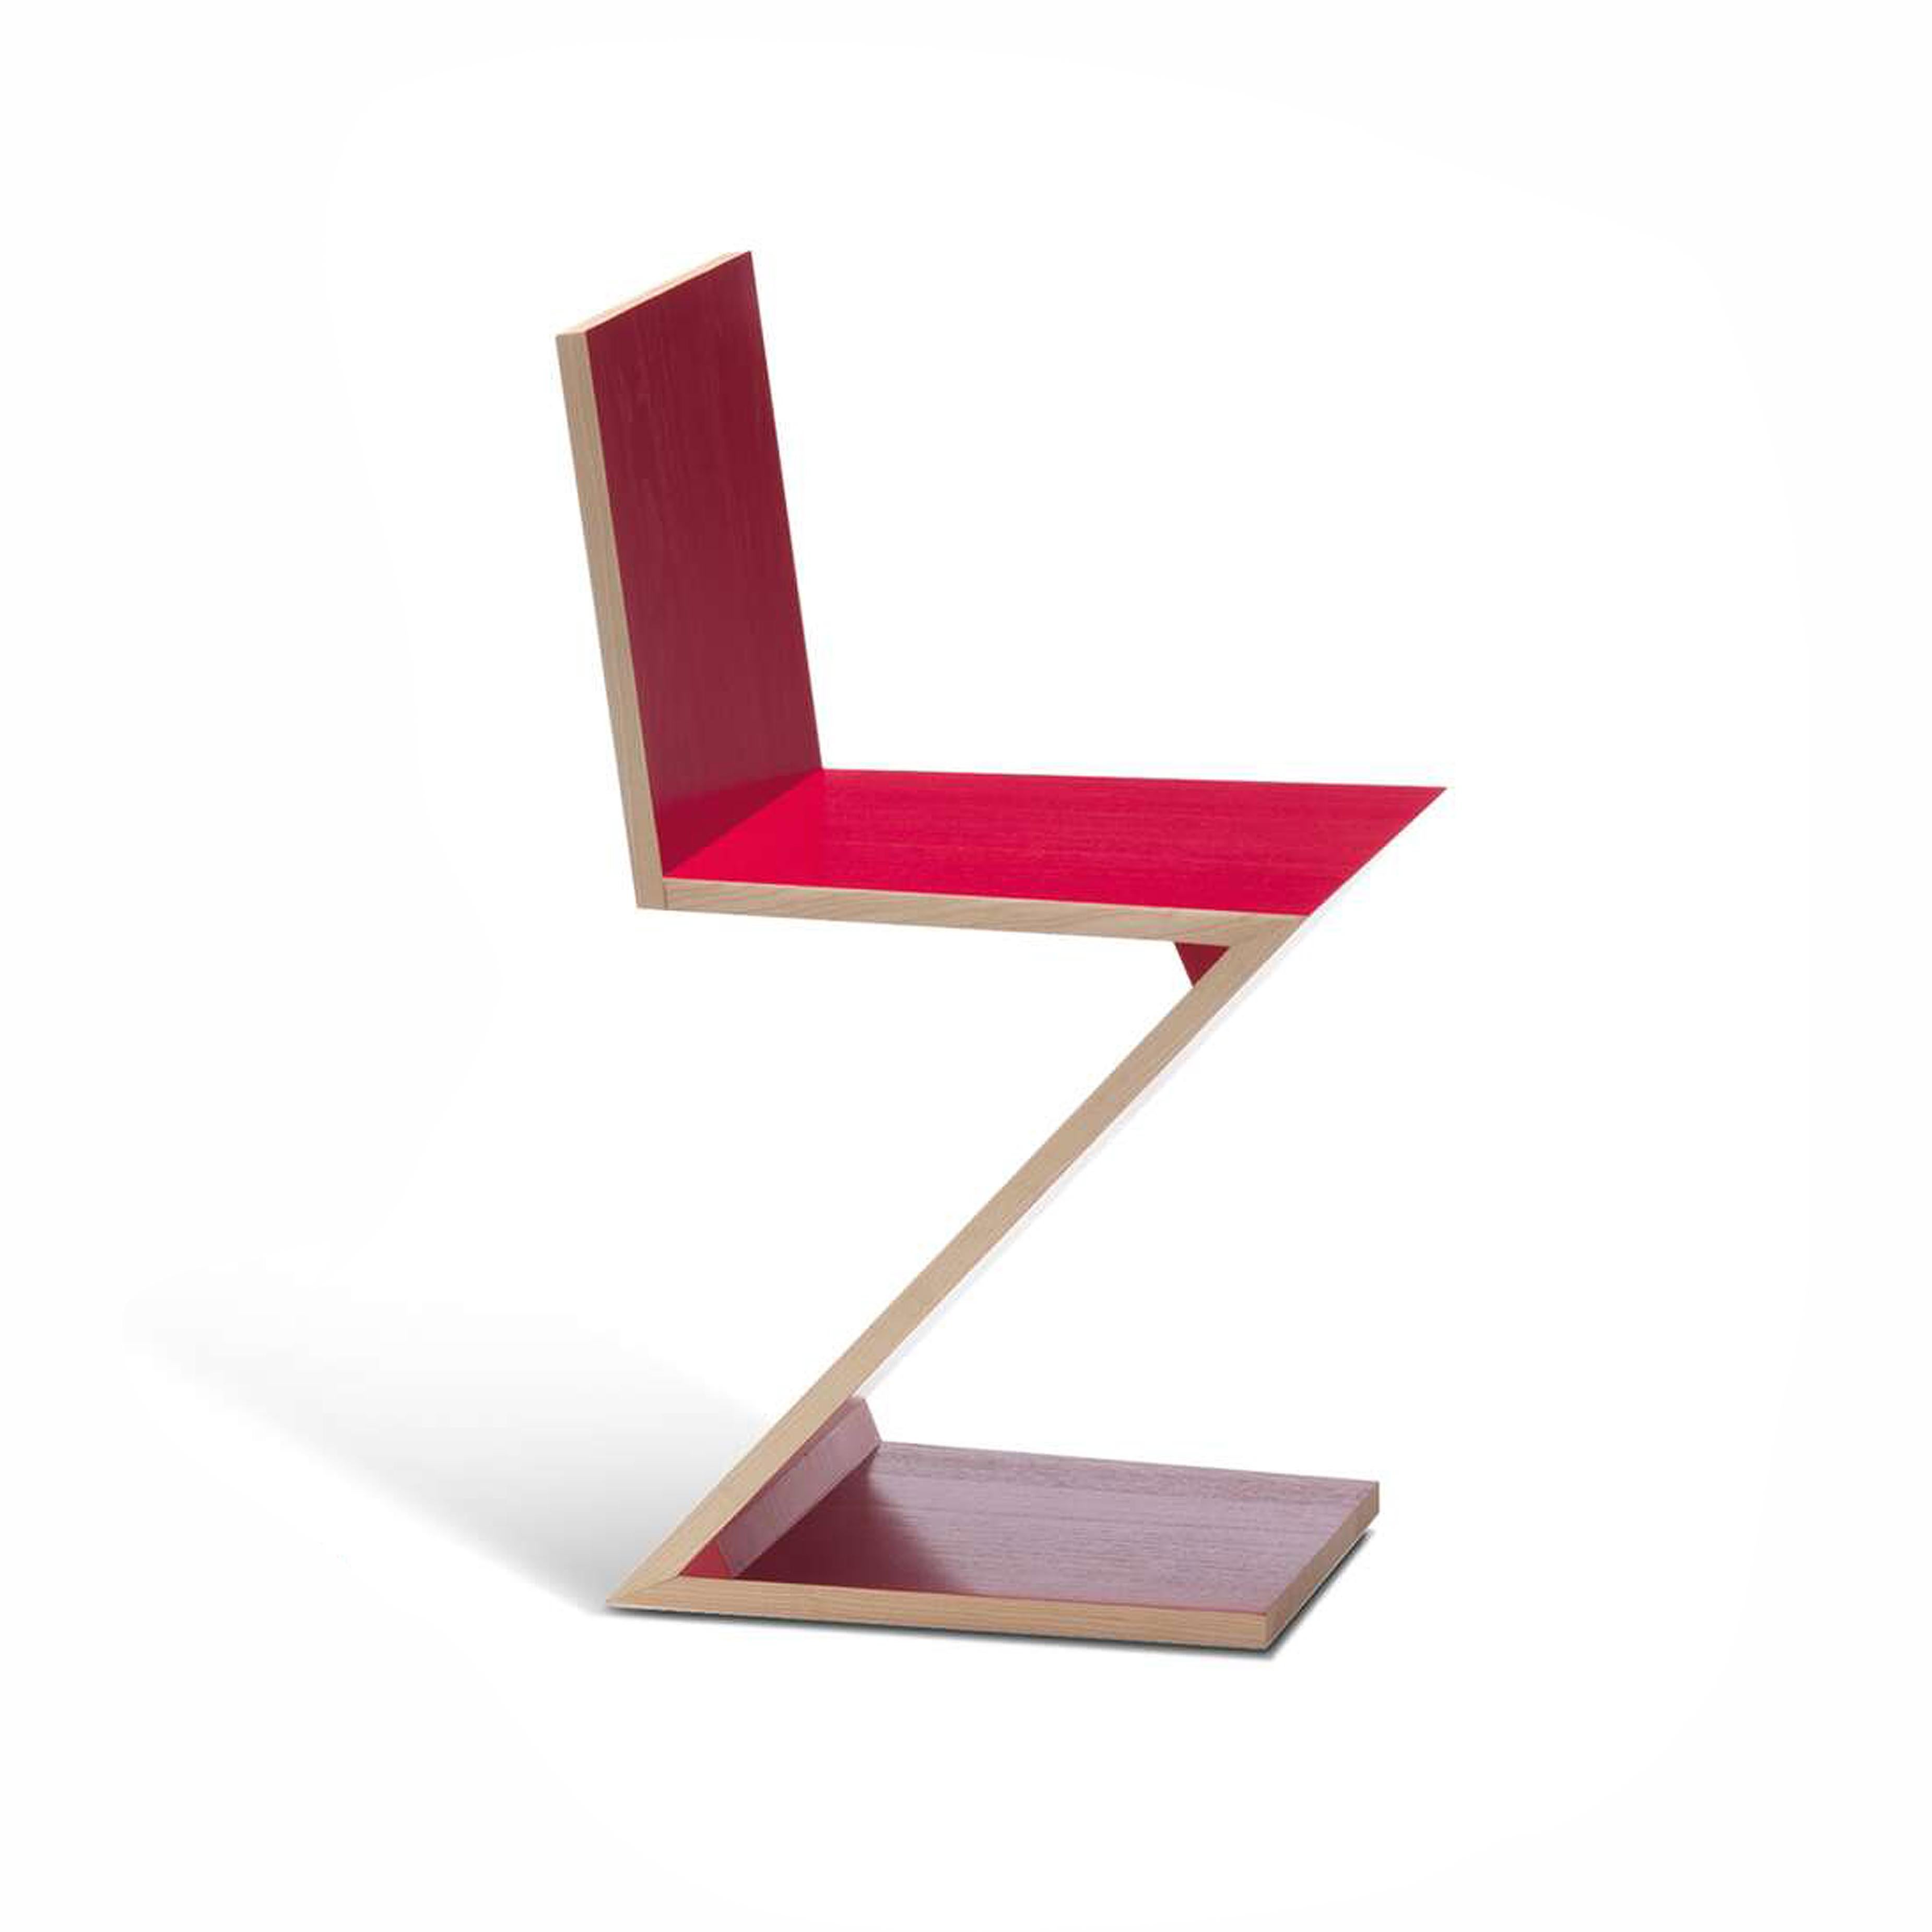 Chair designed by Gerrit Thomas Rietveld in 1934. Relaunched in 1973/ 2011.
Manufactured by Cassina in Italy.

Designed by Gerrit Rietveld, this chair provided an early example of a cantilevered seat, and is composed of four wood boards